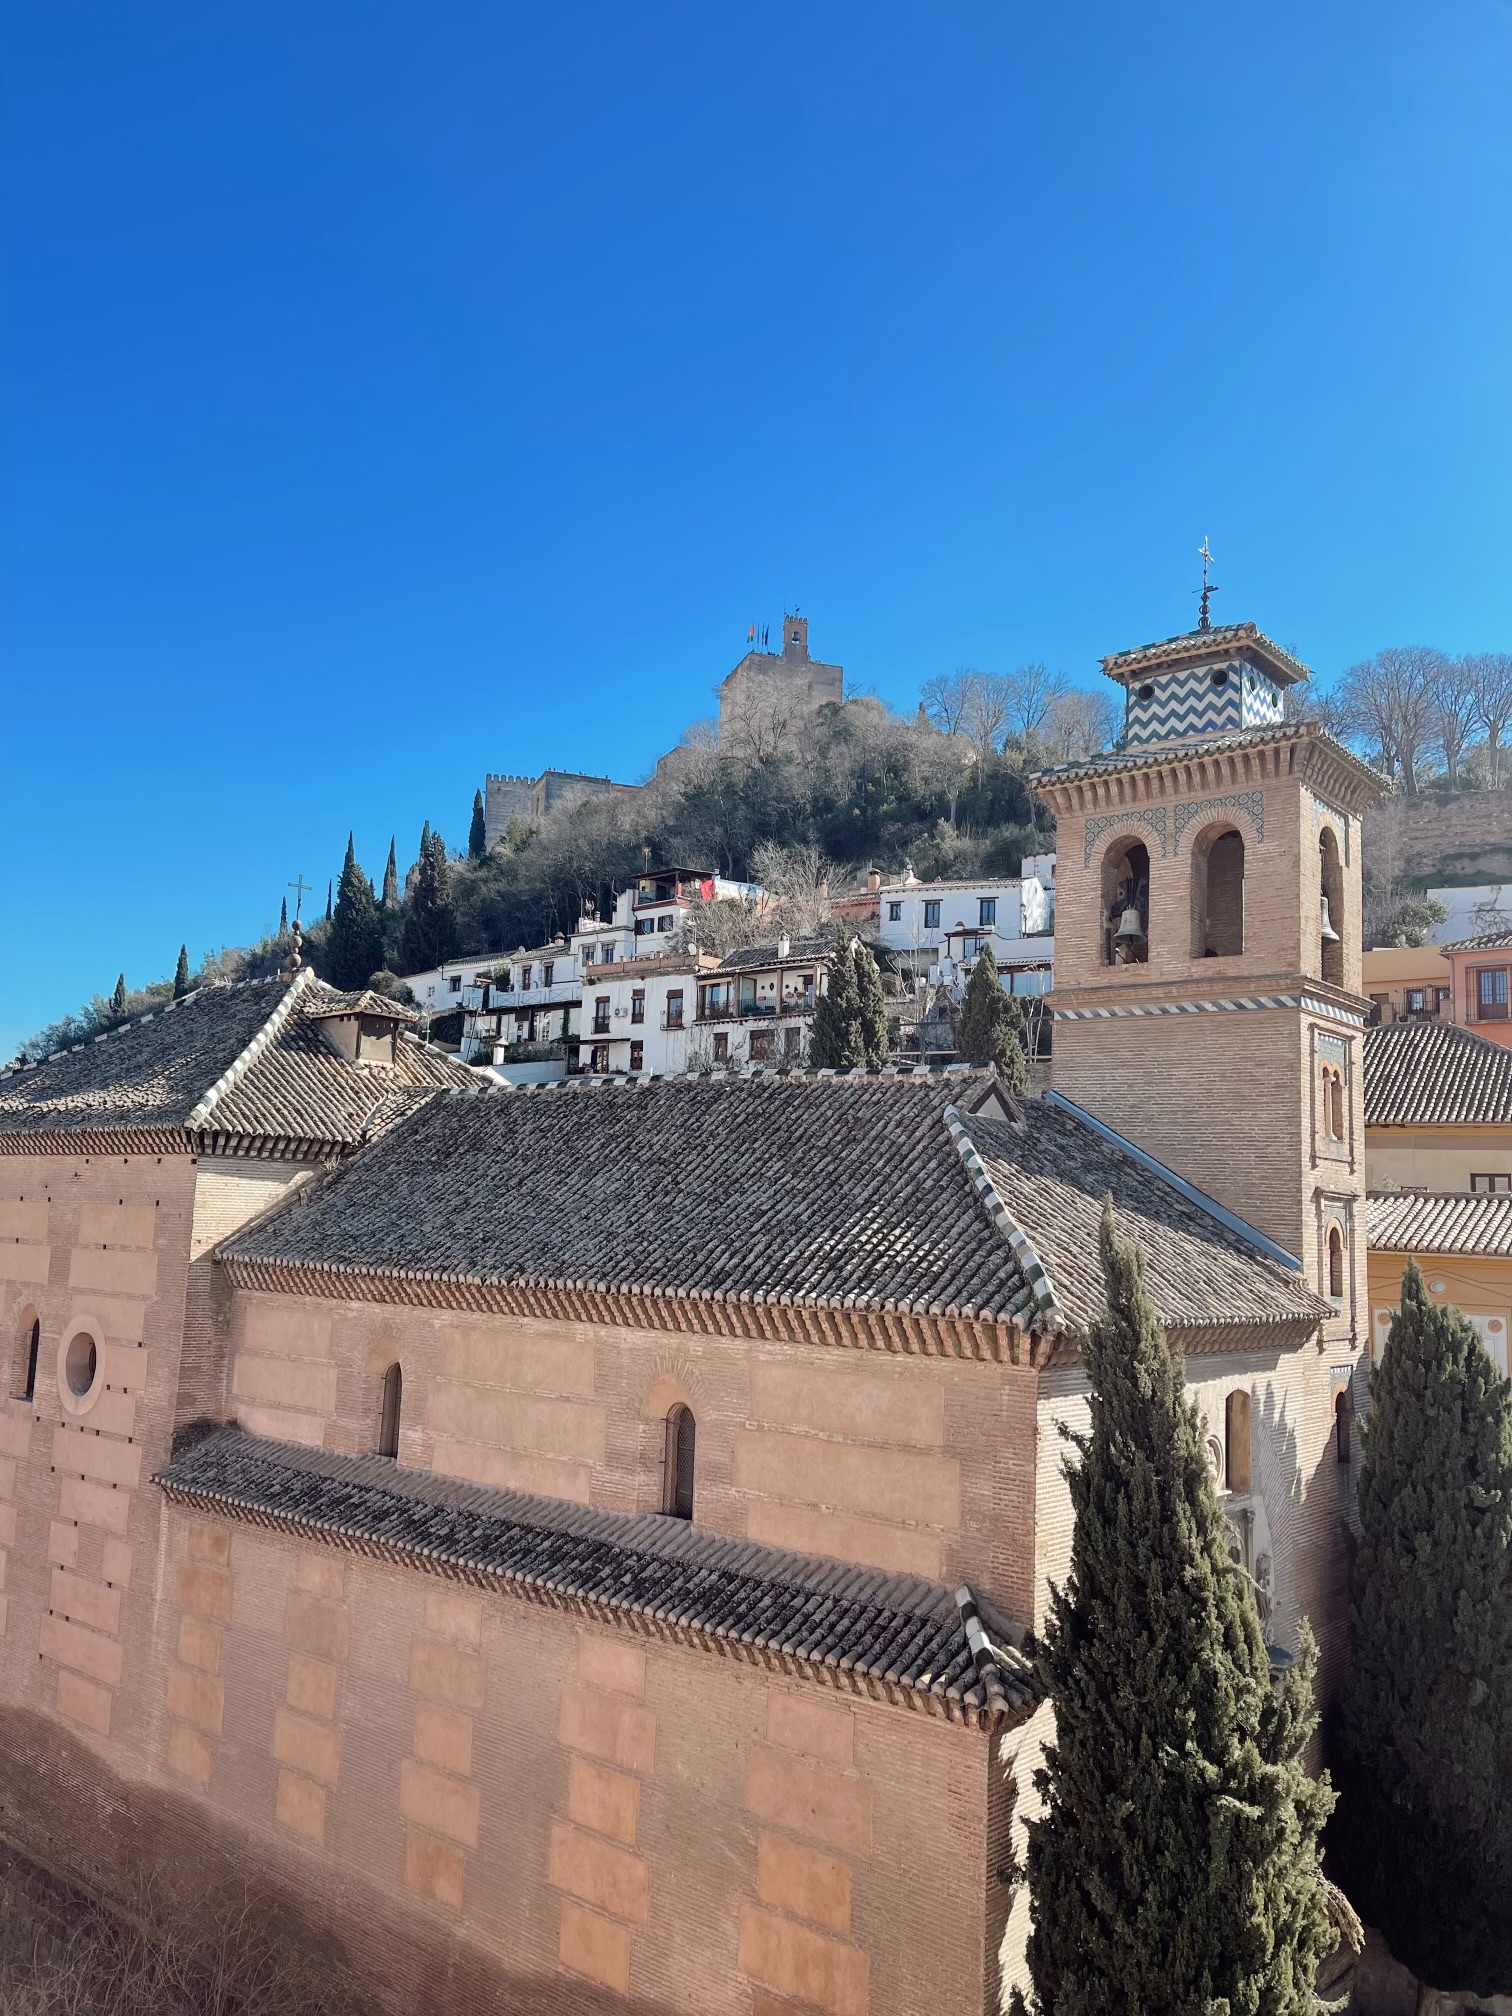 A picture of a beautiful view with the Alhambra.